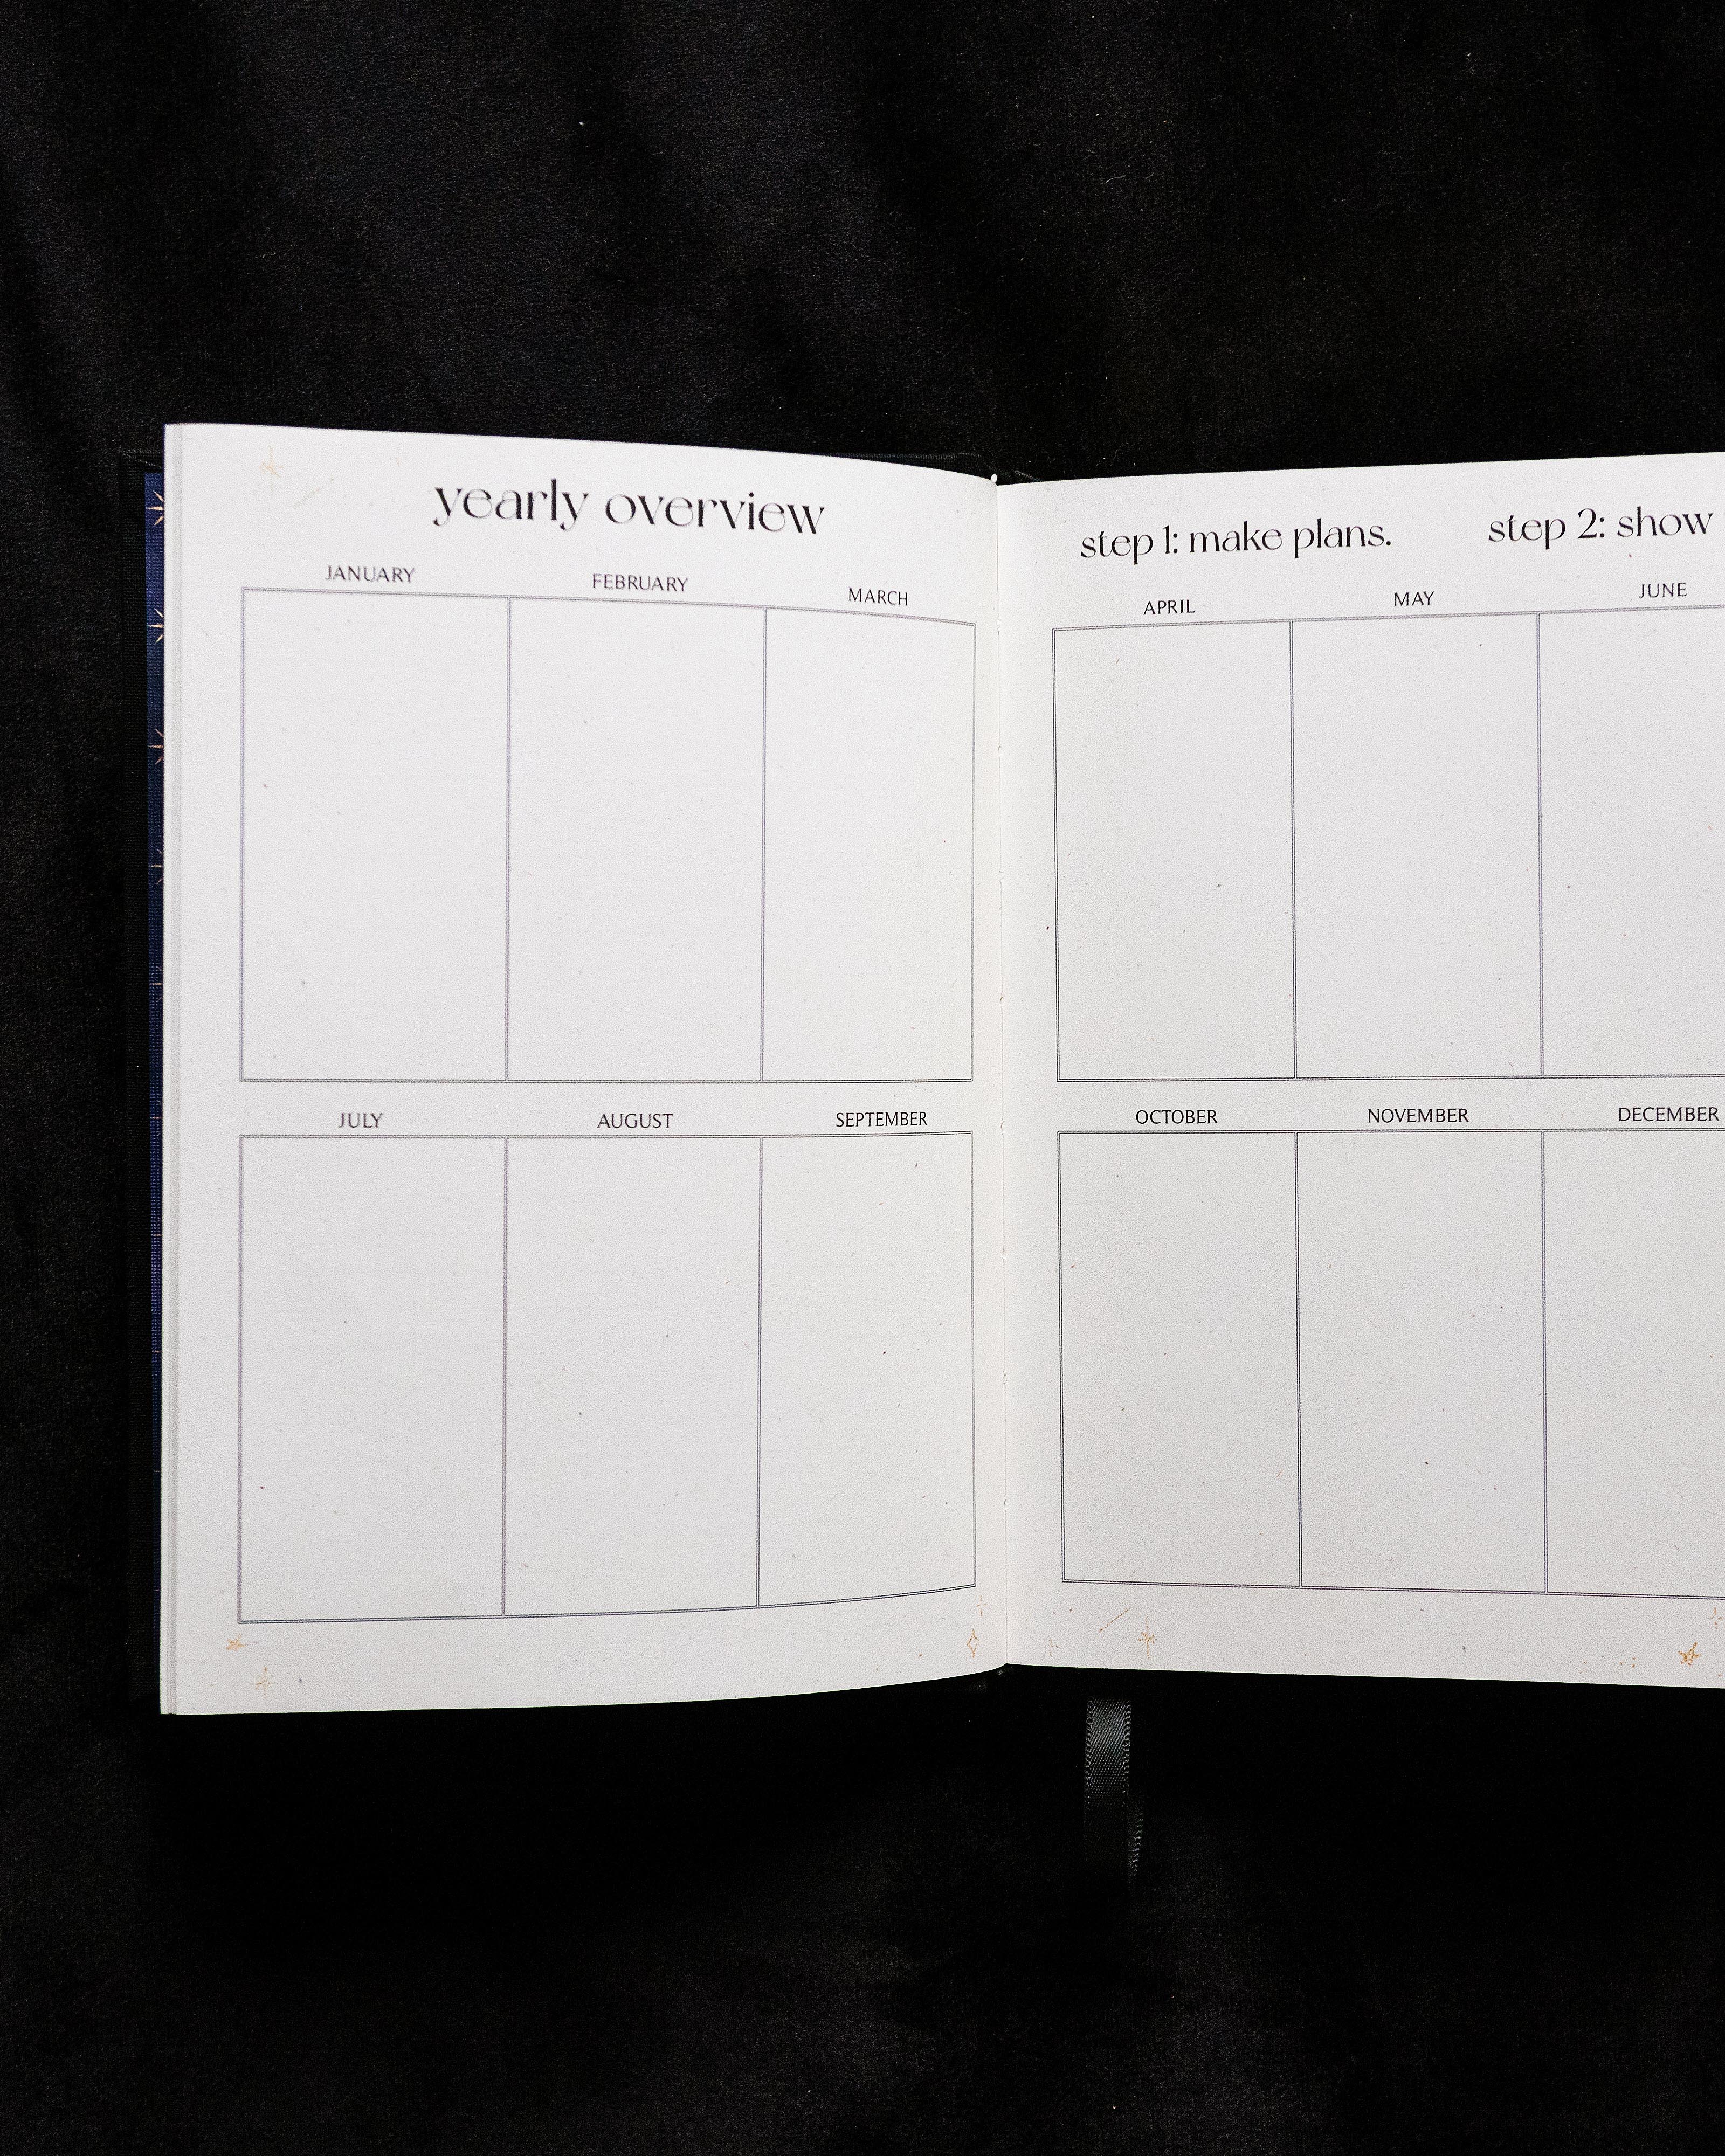 DREAMY MOONS 2024 DAILY PLANNER BLACK